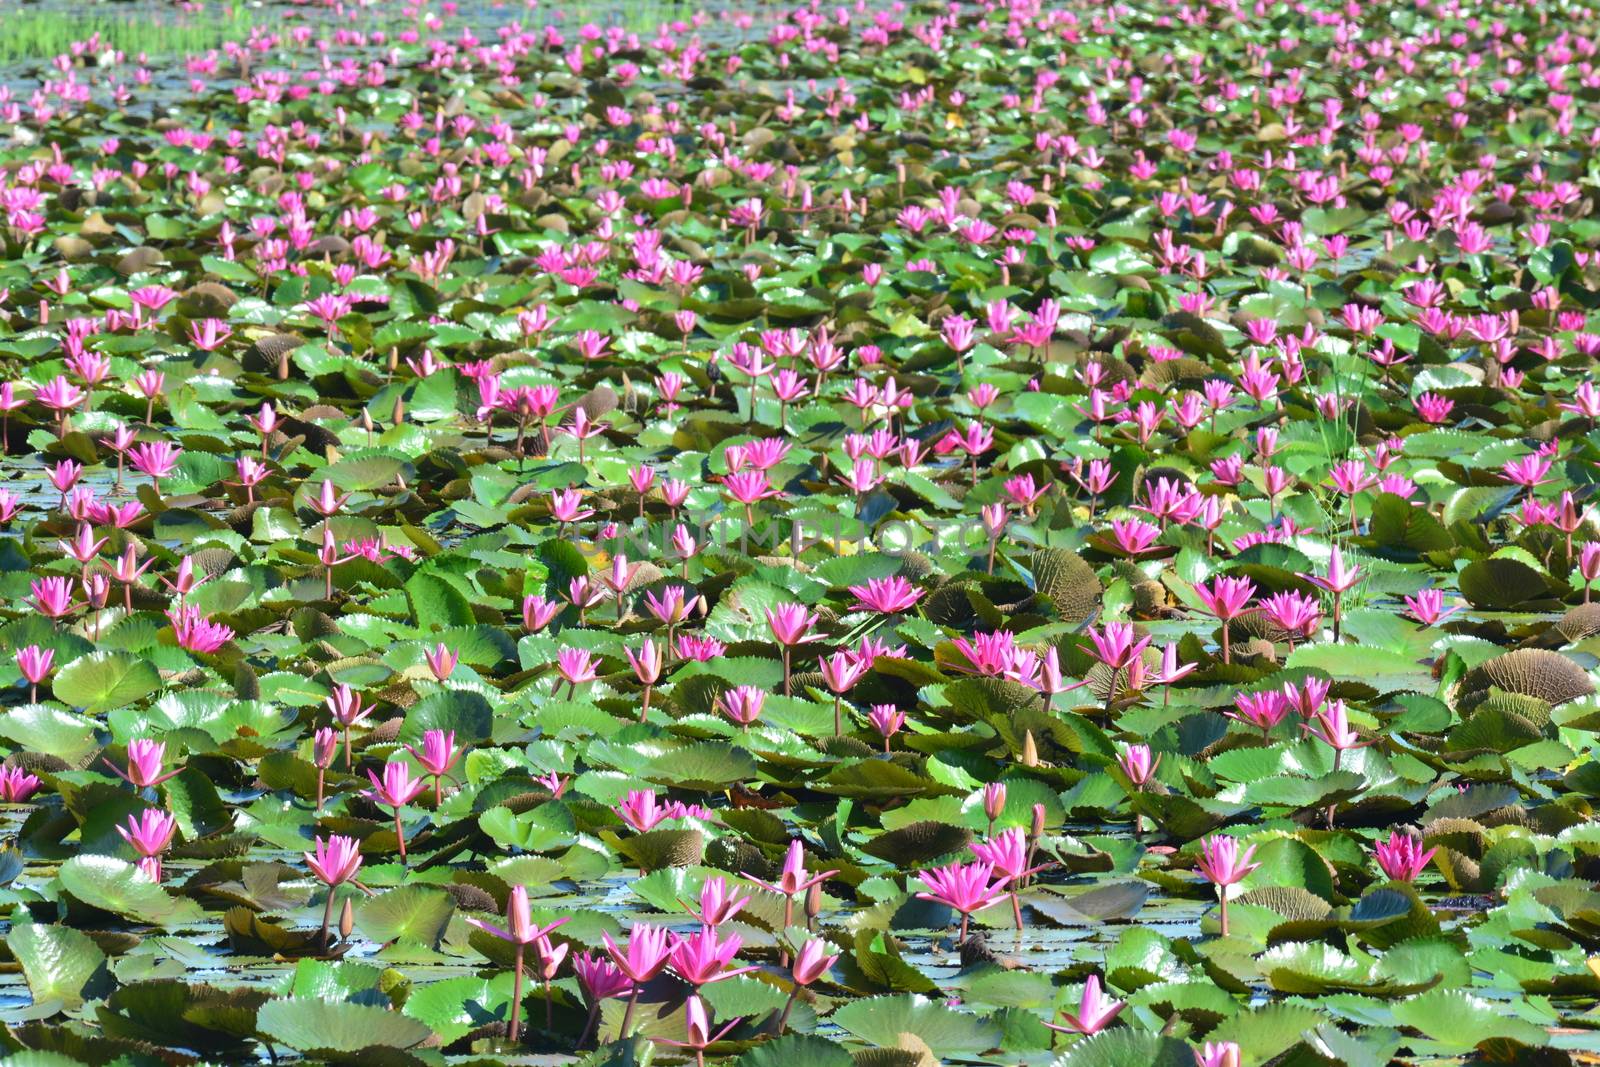 Red Lotus Sea or talay bua daeng by ideation90